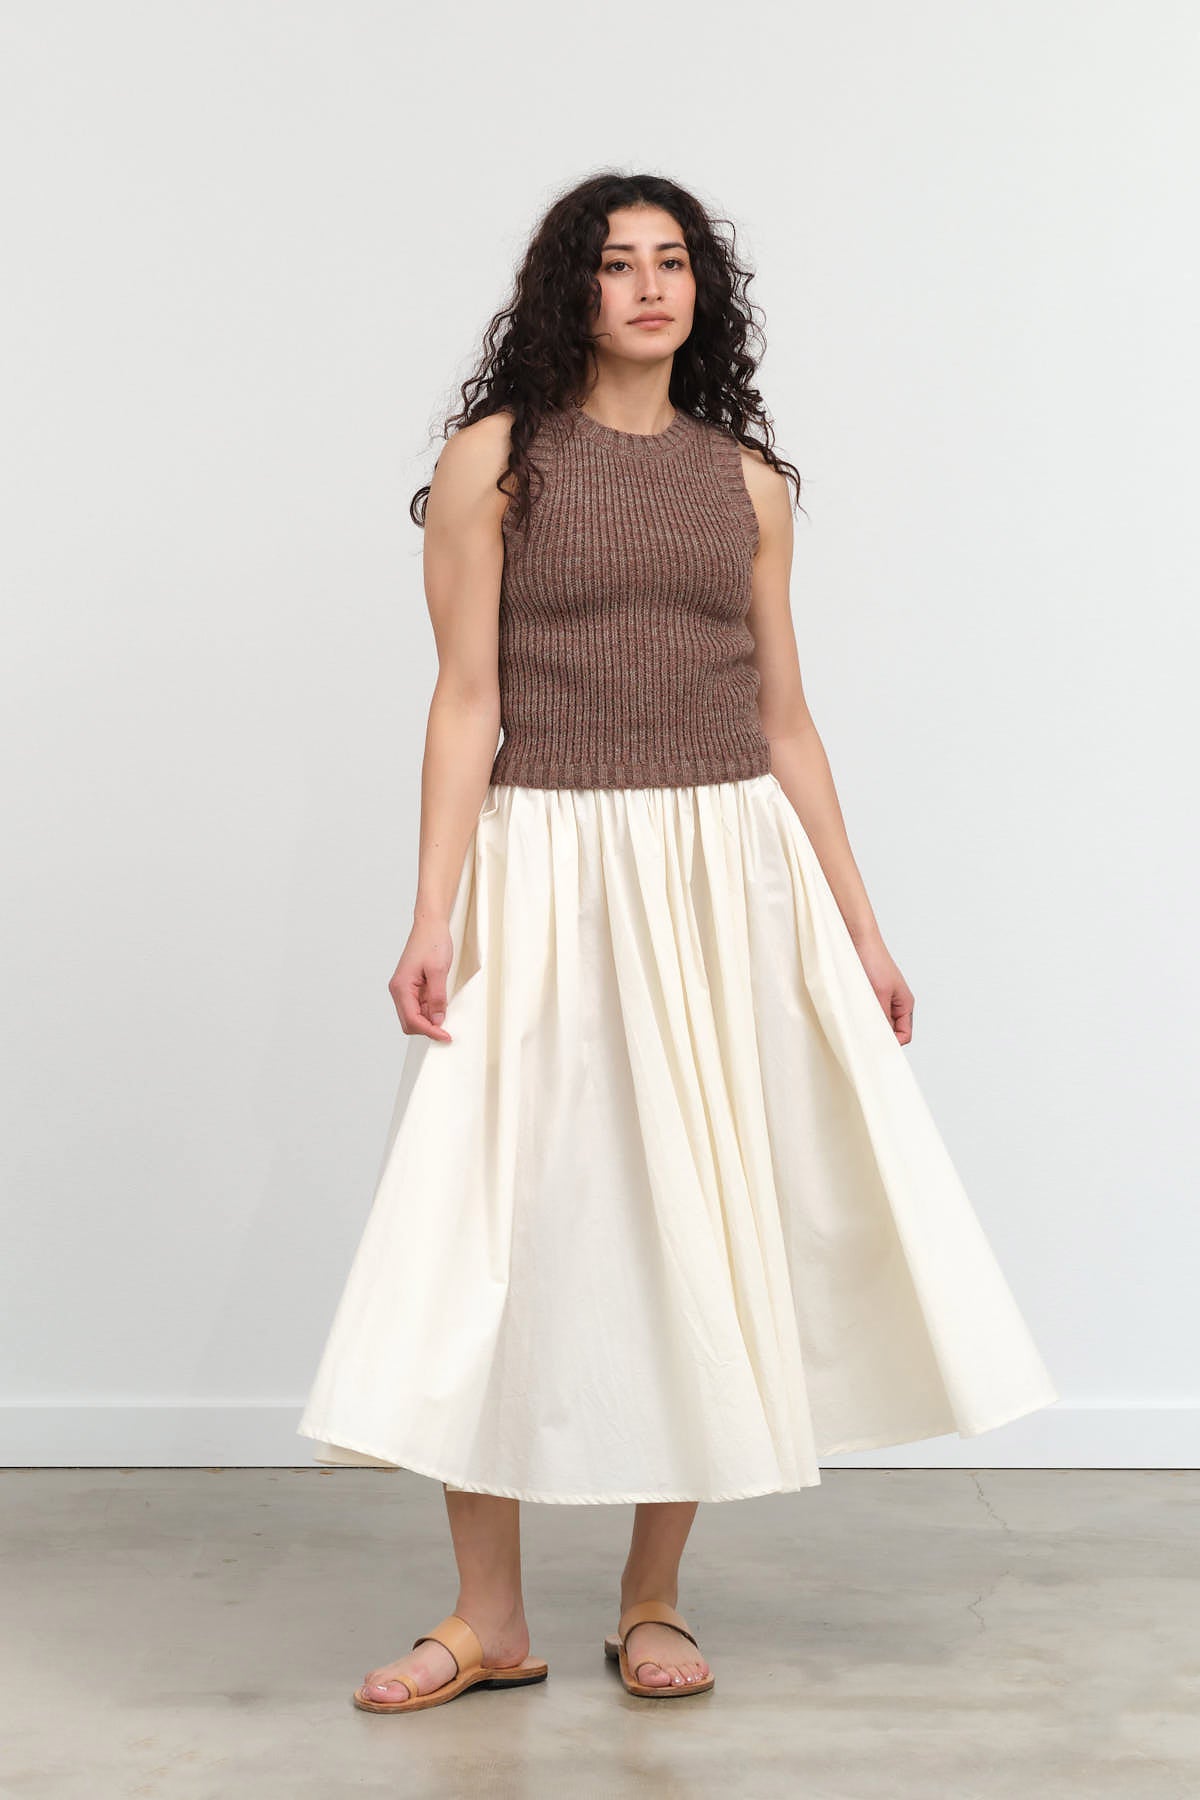 Styled Papery Elastic Prairie Skirt in Off-White